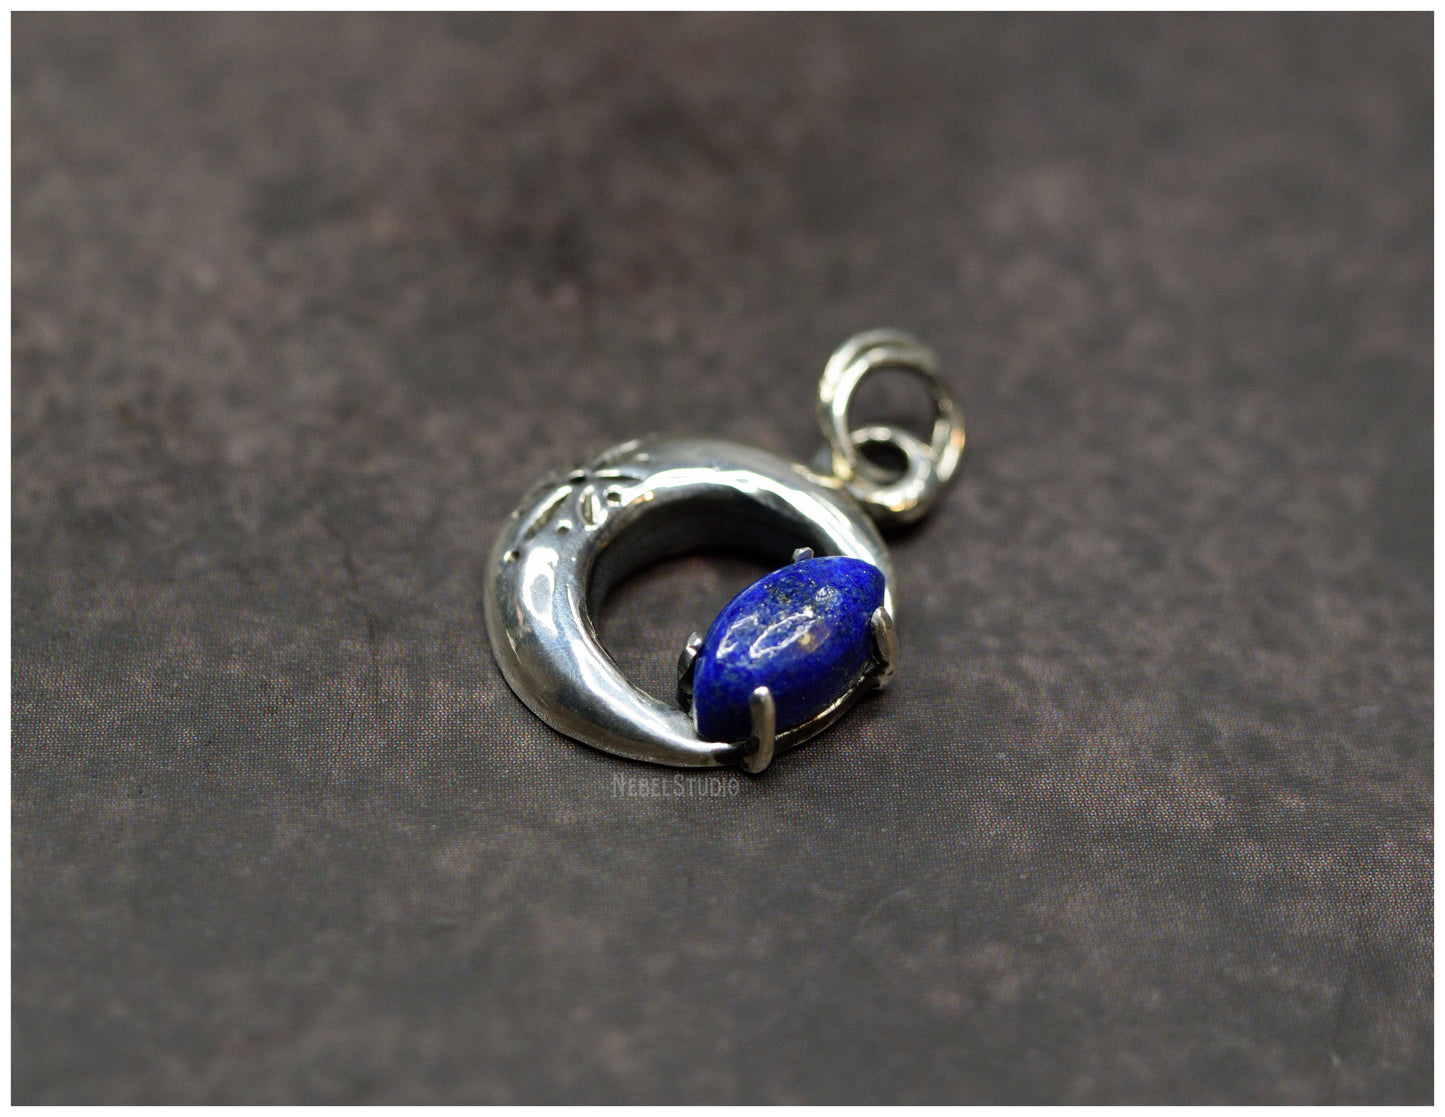 Silver Moon pendant with marquise cut lapis lazuli Limited Edition